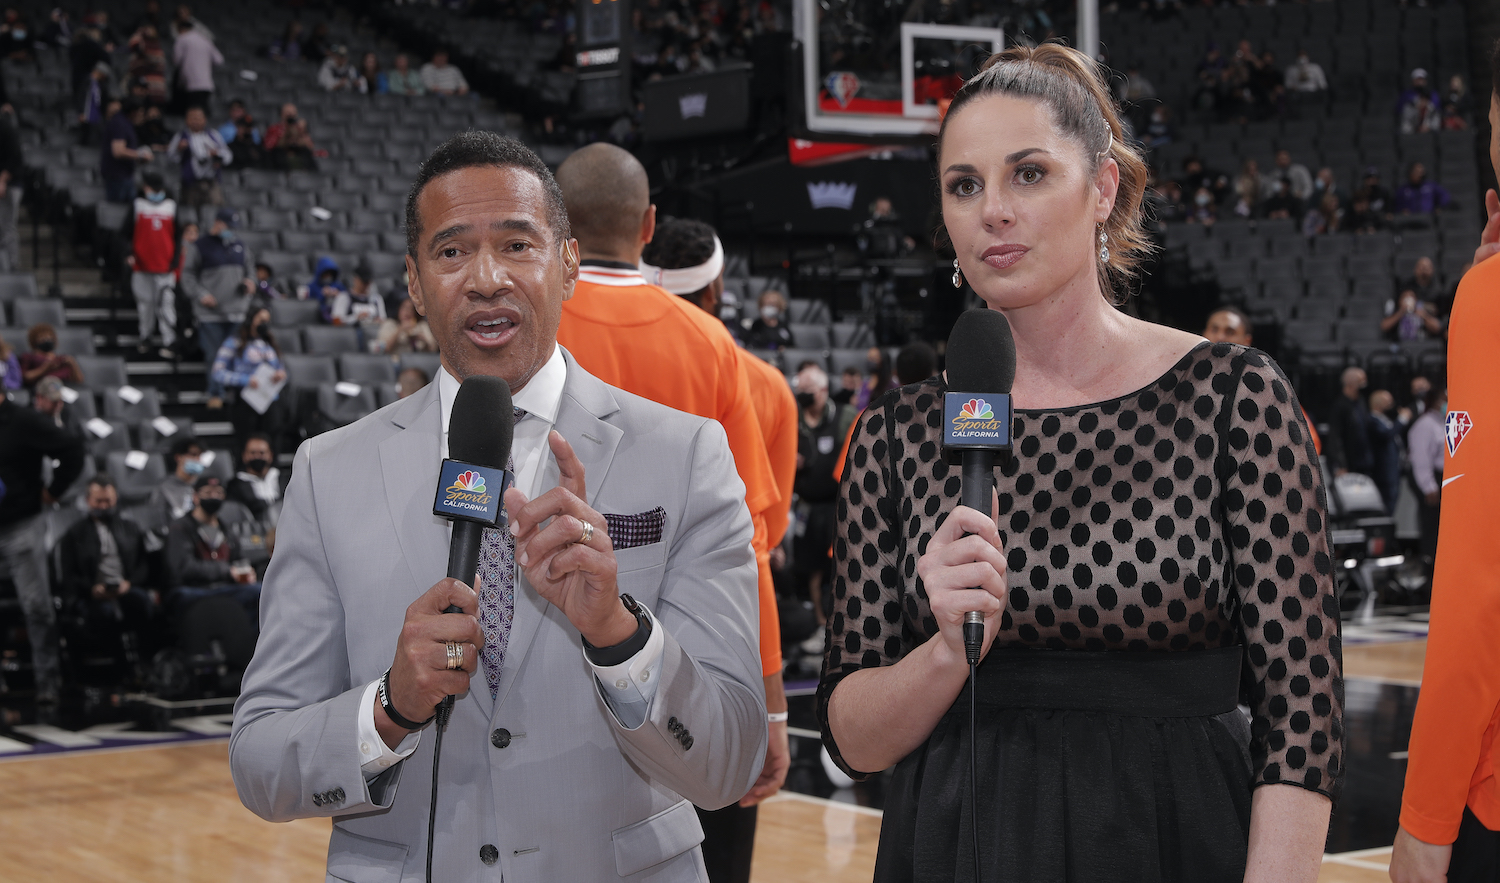 SACRAMENTO, CA - DECEMBER 22: Annoucer Mark Jones and Commentator Kayte Christensen during the game between the Los Angeles Clippers and Sacramento Kings on December 22, 2021 at Golden 1 Center in Sacramento, California. NOTE TO USER: User expressly acknowledges and agrees that, by downloading and or using this photograph, User is consenting to the terms and conditions of the Getty Images Agreement. Mandatory Copyright Notice: Copyright 2021 NBAE (Photo by Rocky Widner/NBAE via Getty Images)